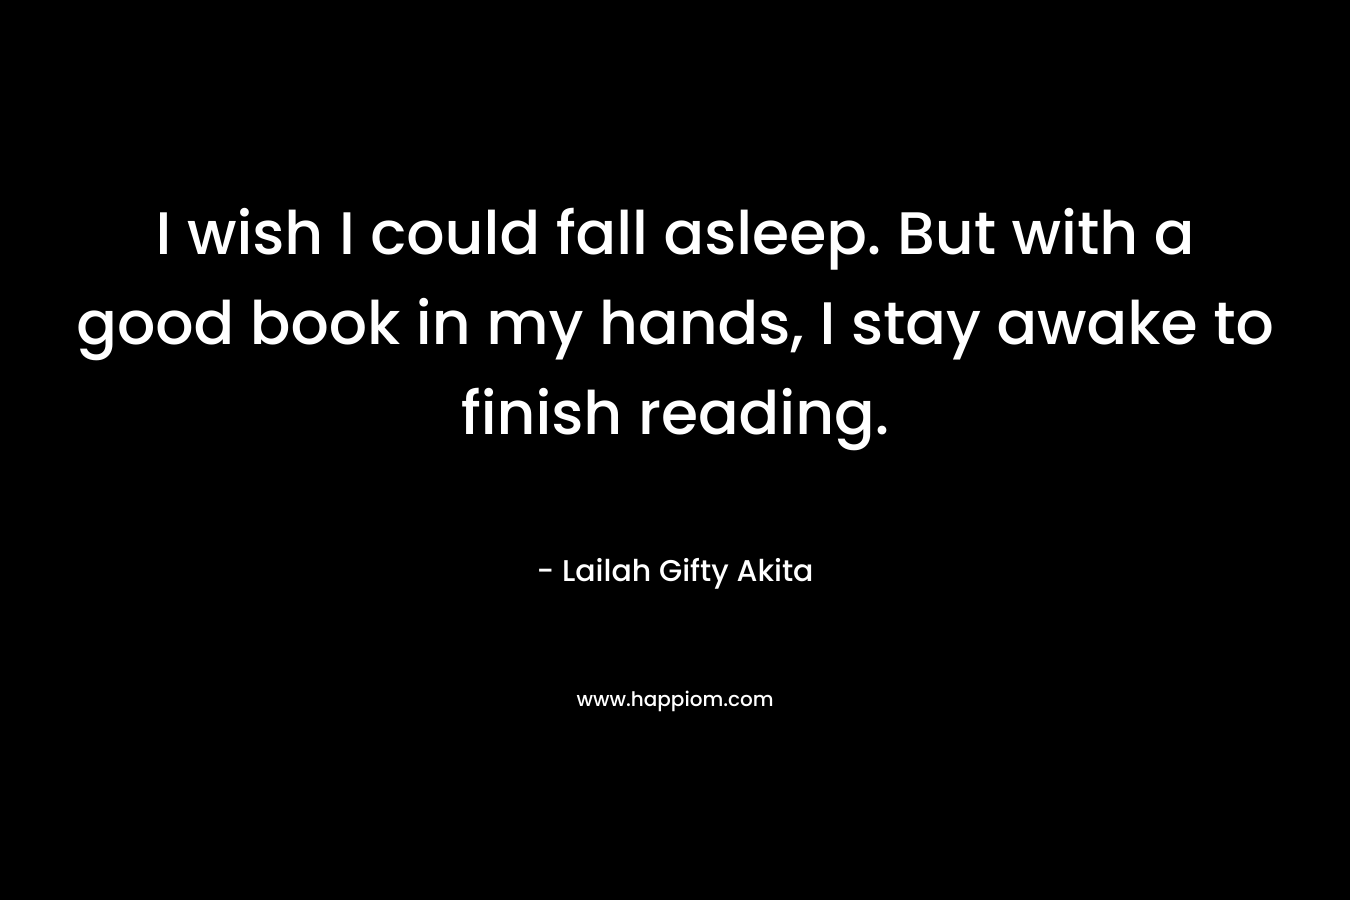 I wish I could fall asleep. But with a good book in my hands, I stay awake to finish reading.